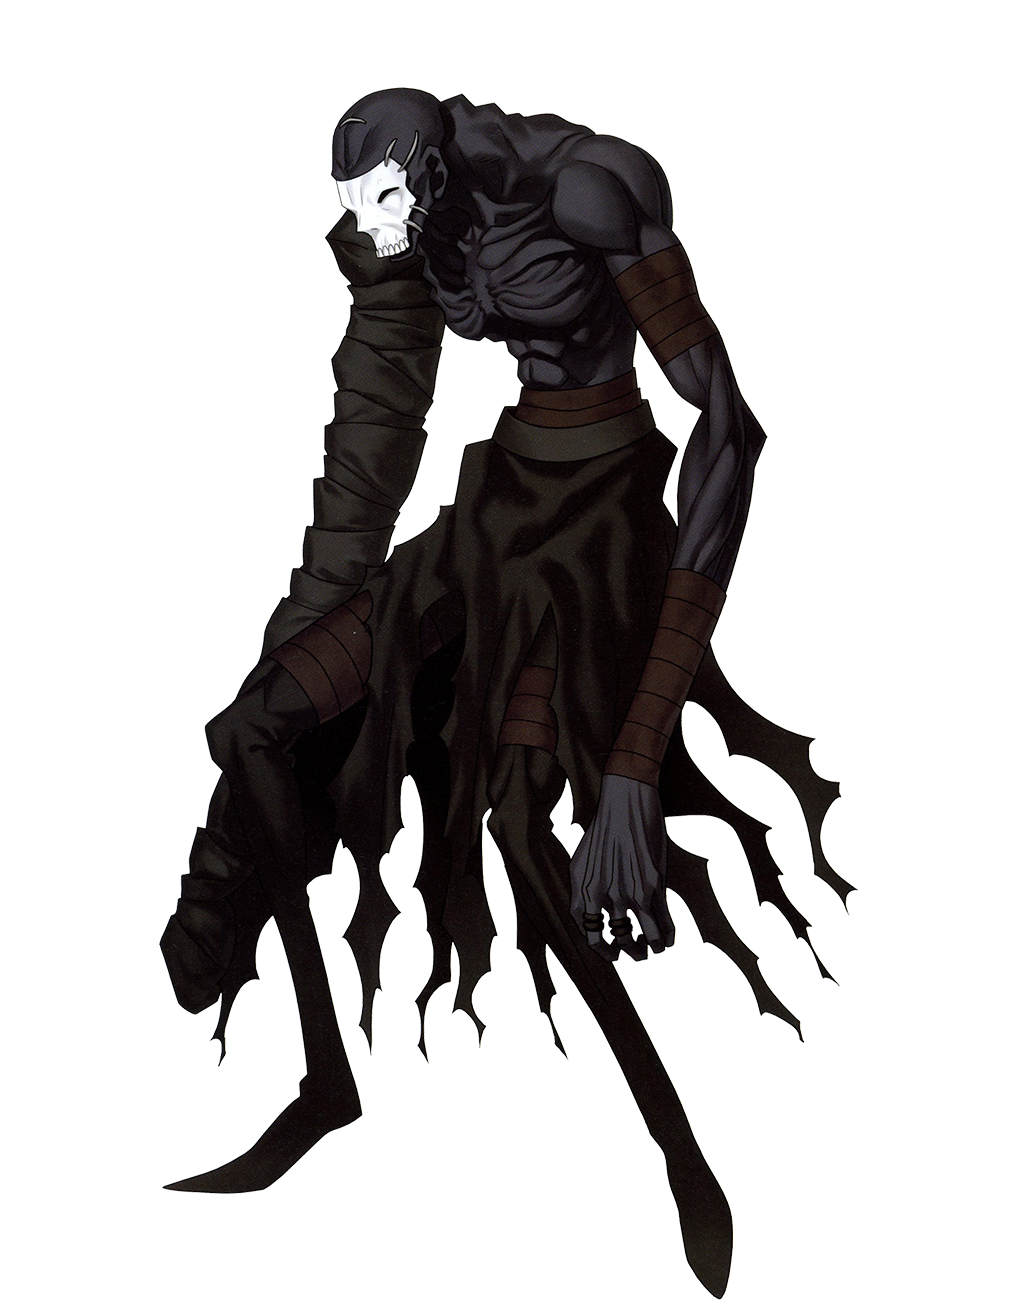 Hassan of the Cursed Arm | TYPE-MOON Wiki | Fandom